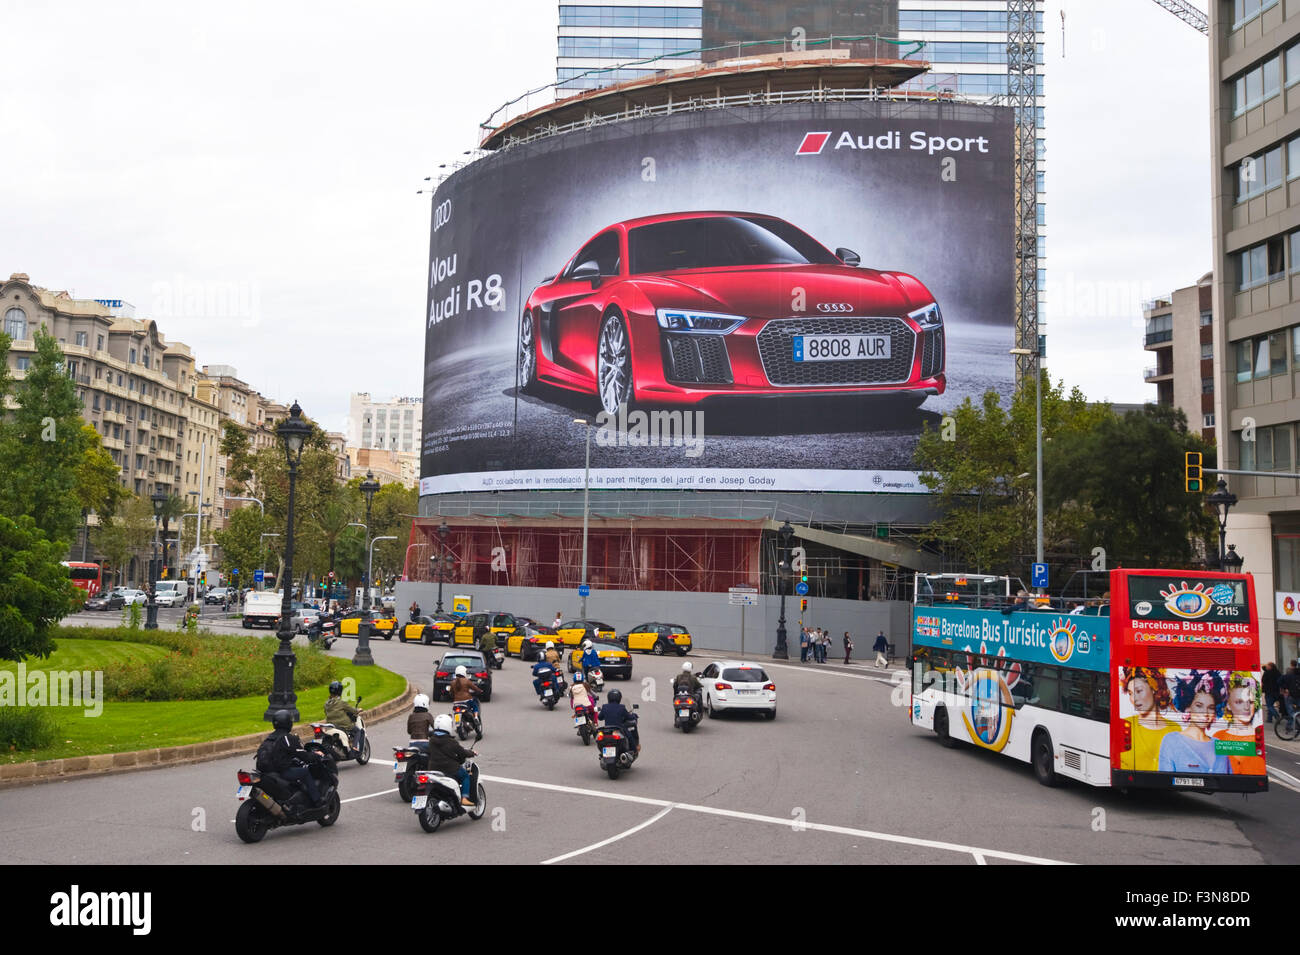 Giant billboard on front of building advertising Audi R8 motorcar in Barcelona Catalonia Spain ES Stock Photo